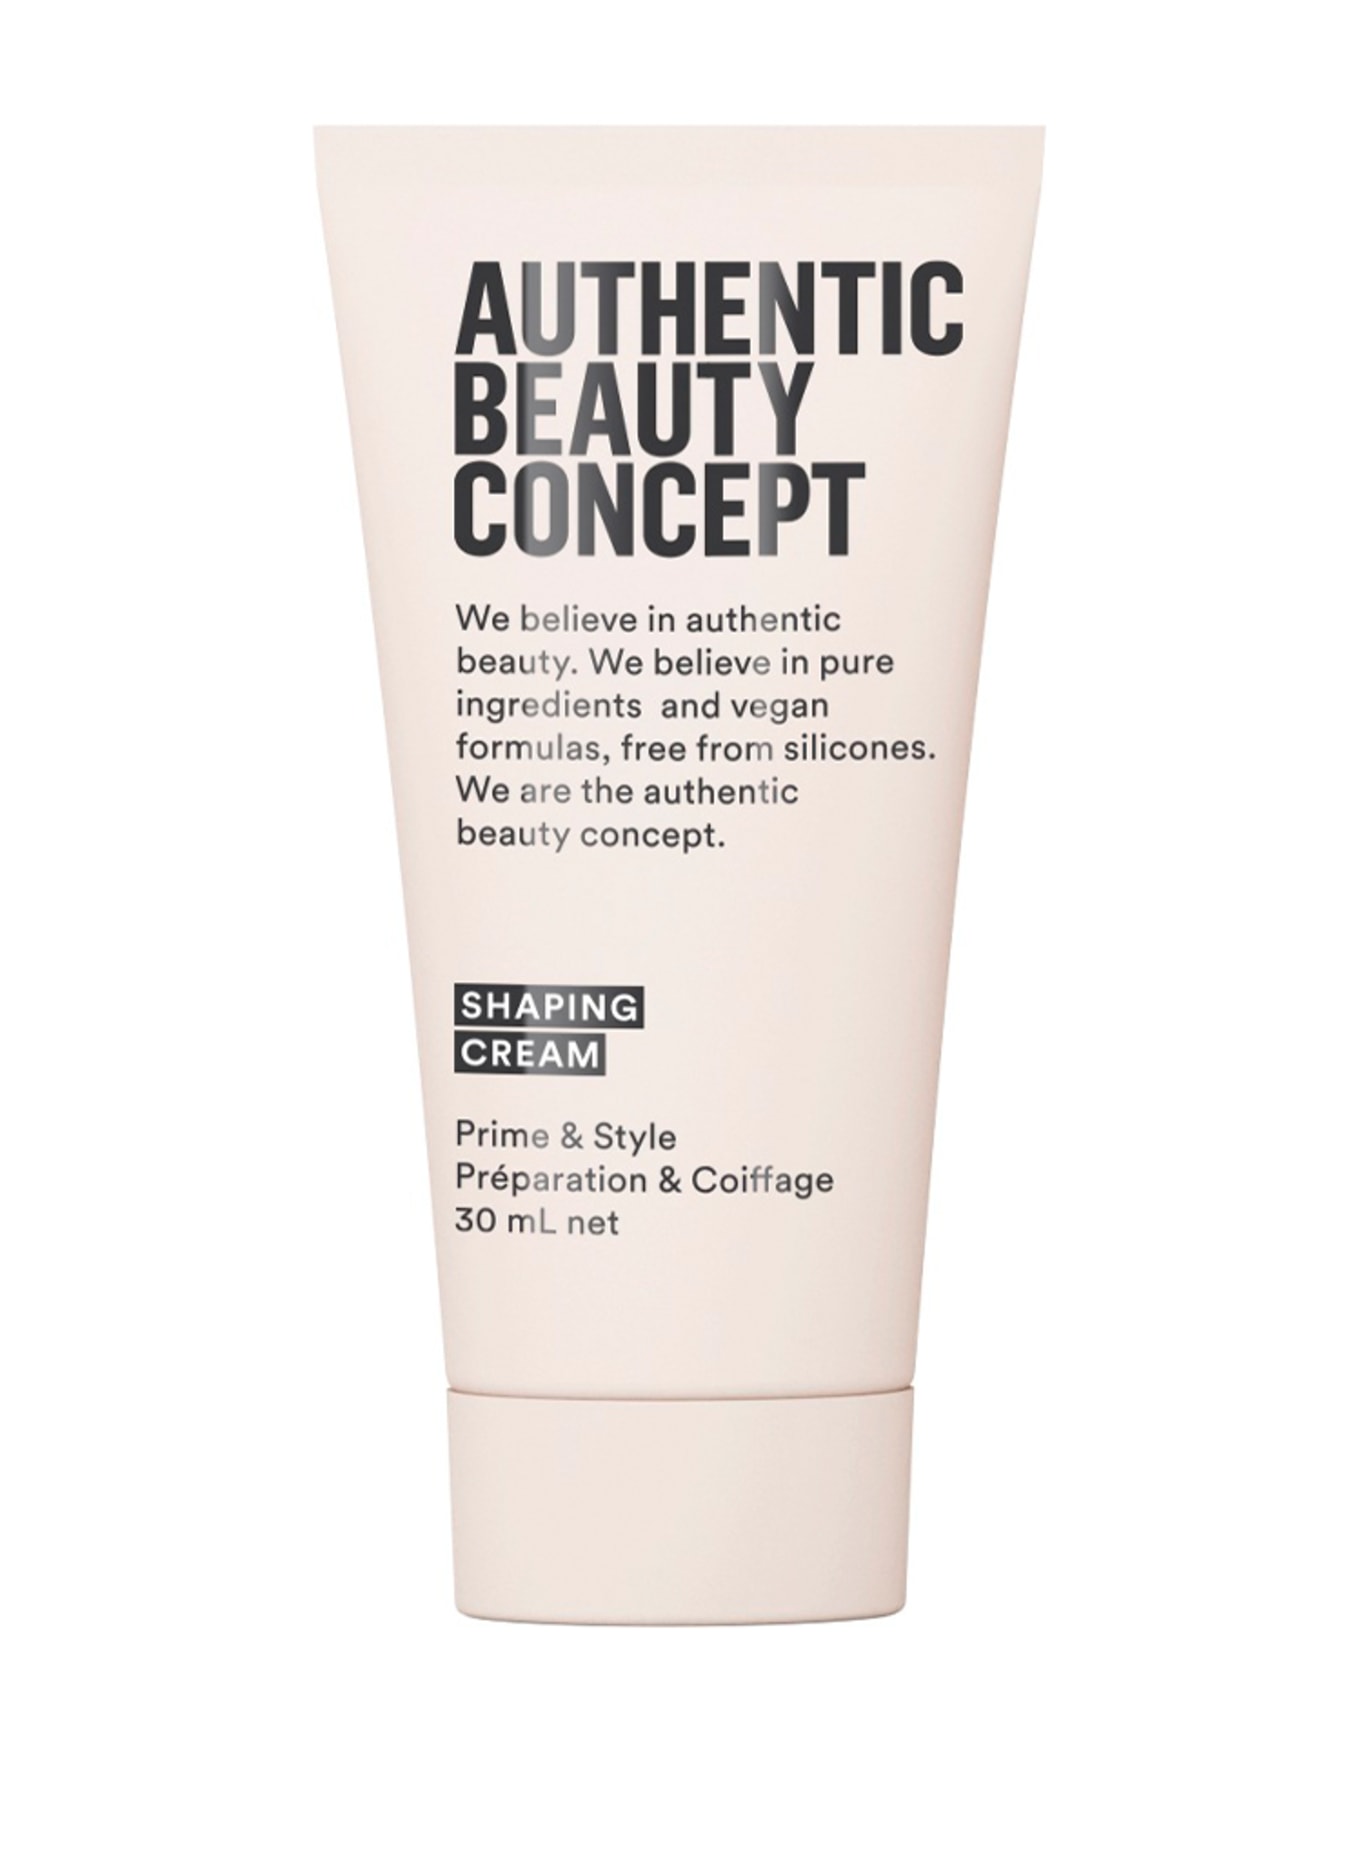 AUTHENTIC BEAUTY CONCEPT SHAPING CREAM (Obrazek 1)